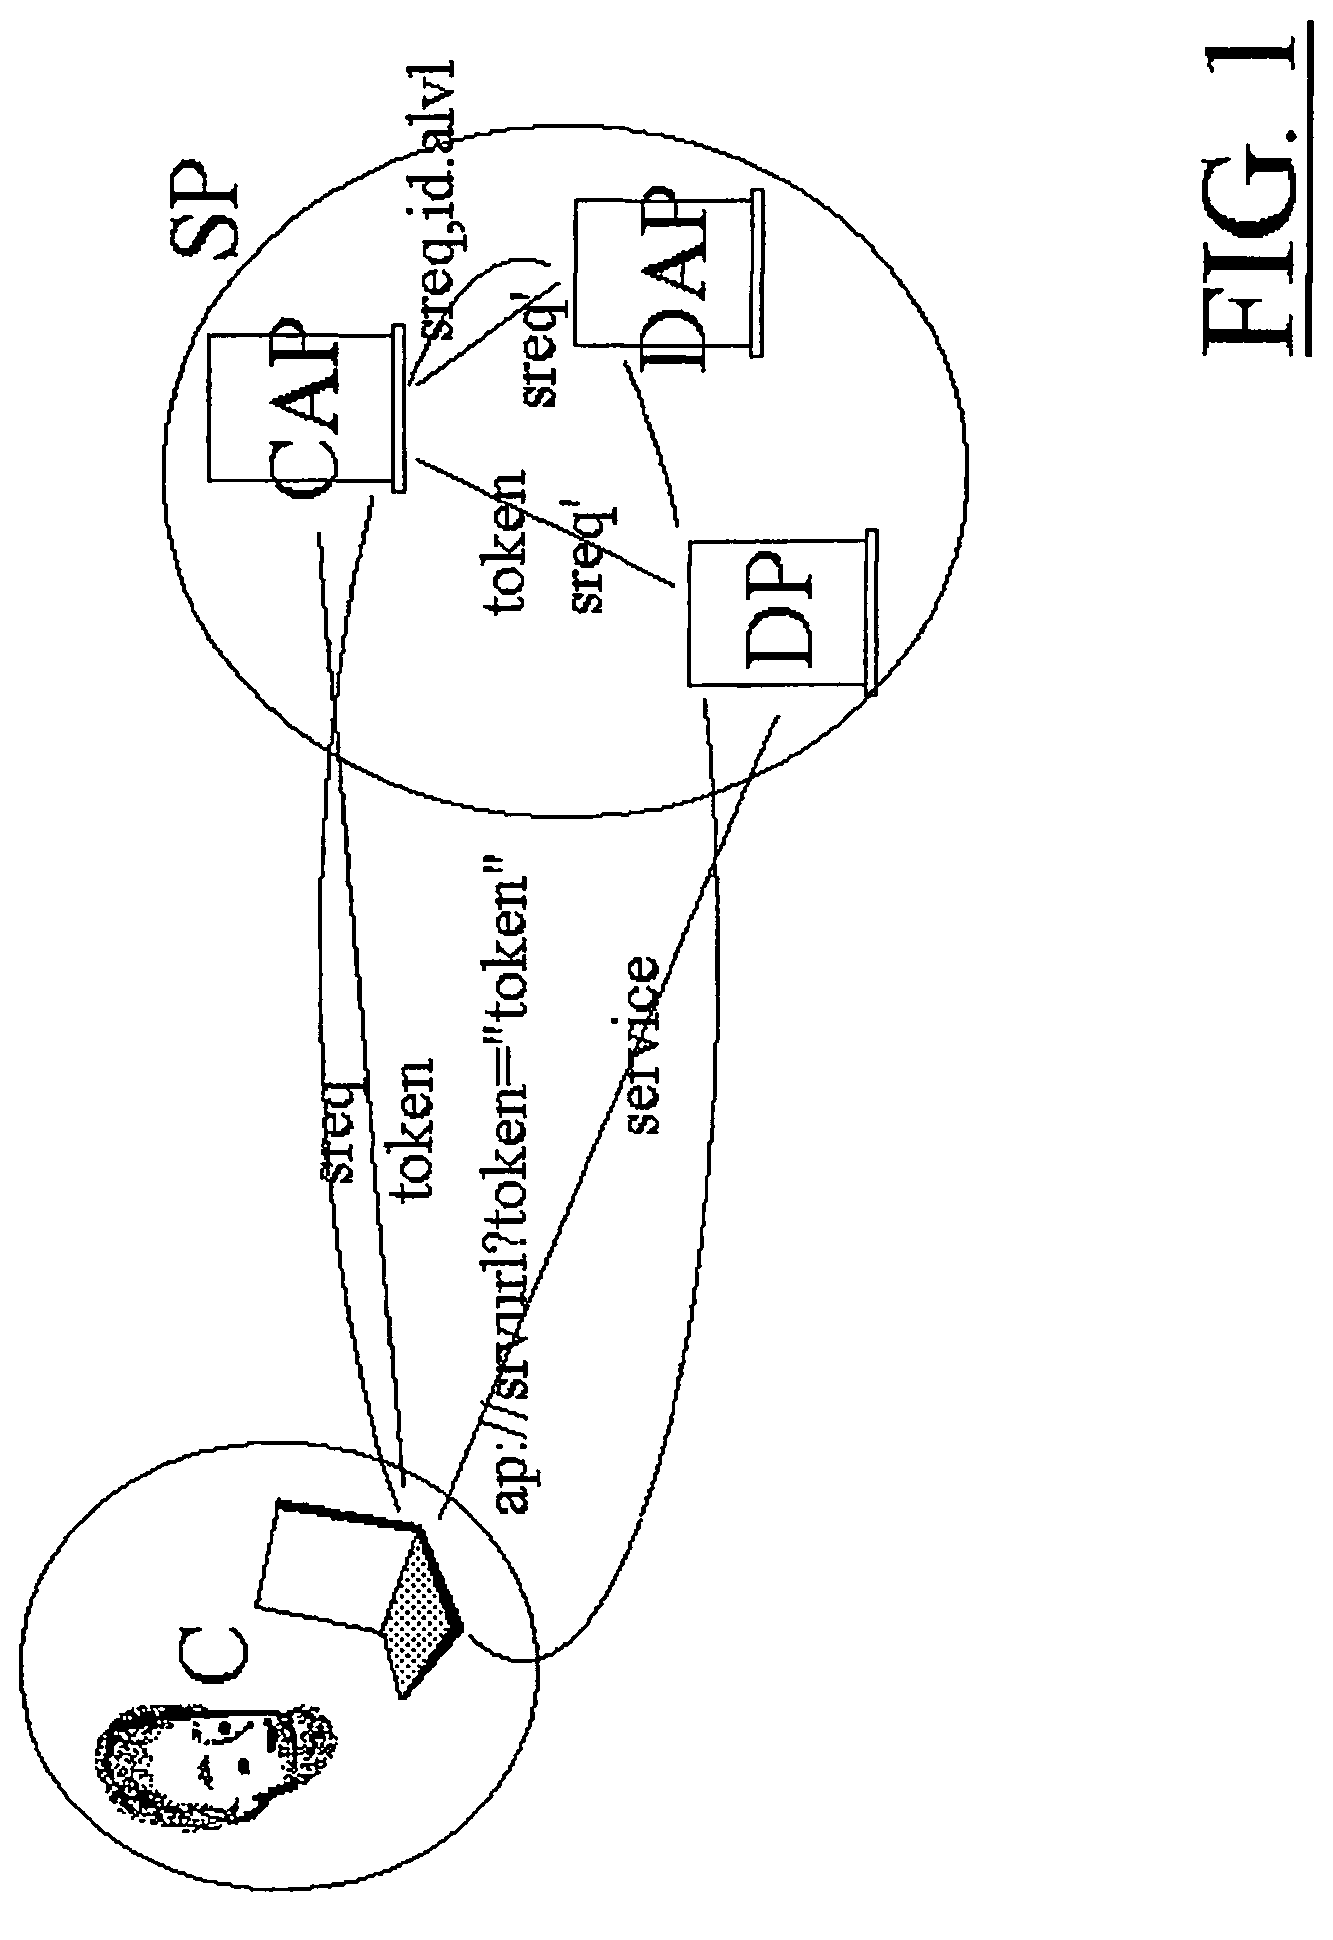 Method and system for a service process to provide a service to a client